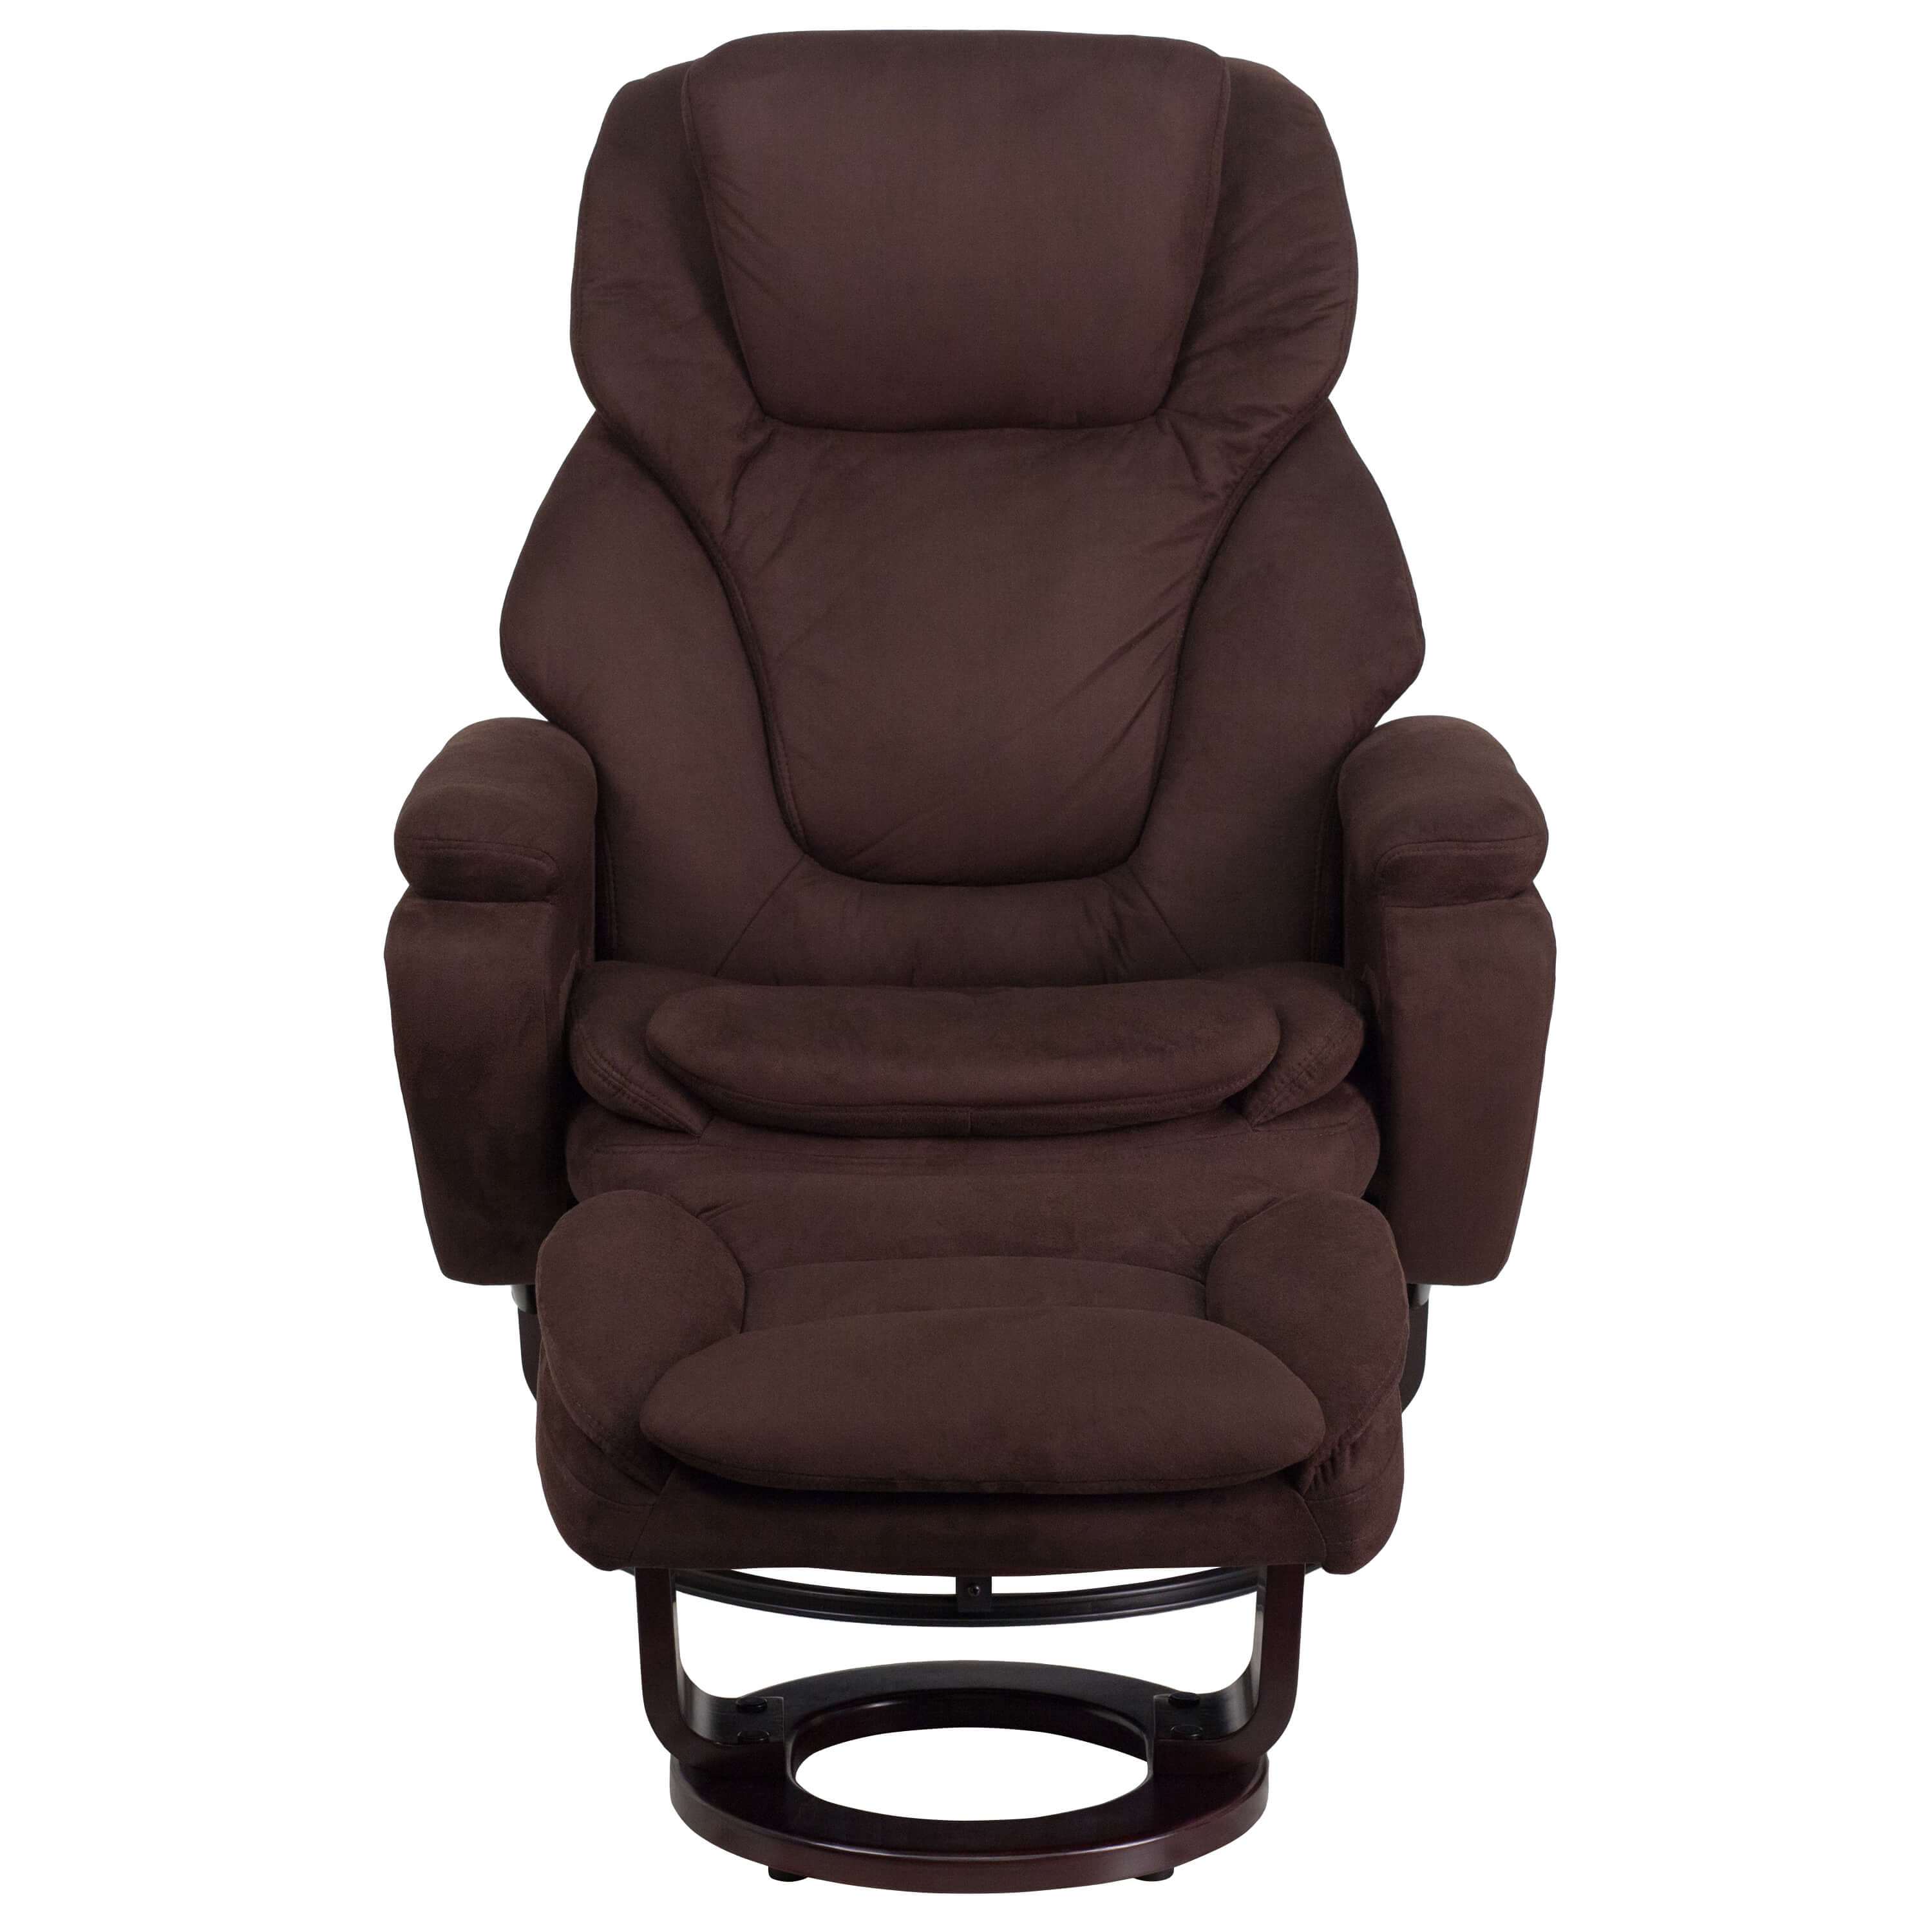 Brown recliner front view